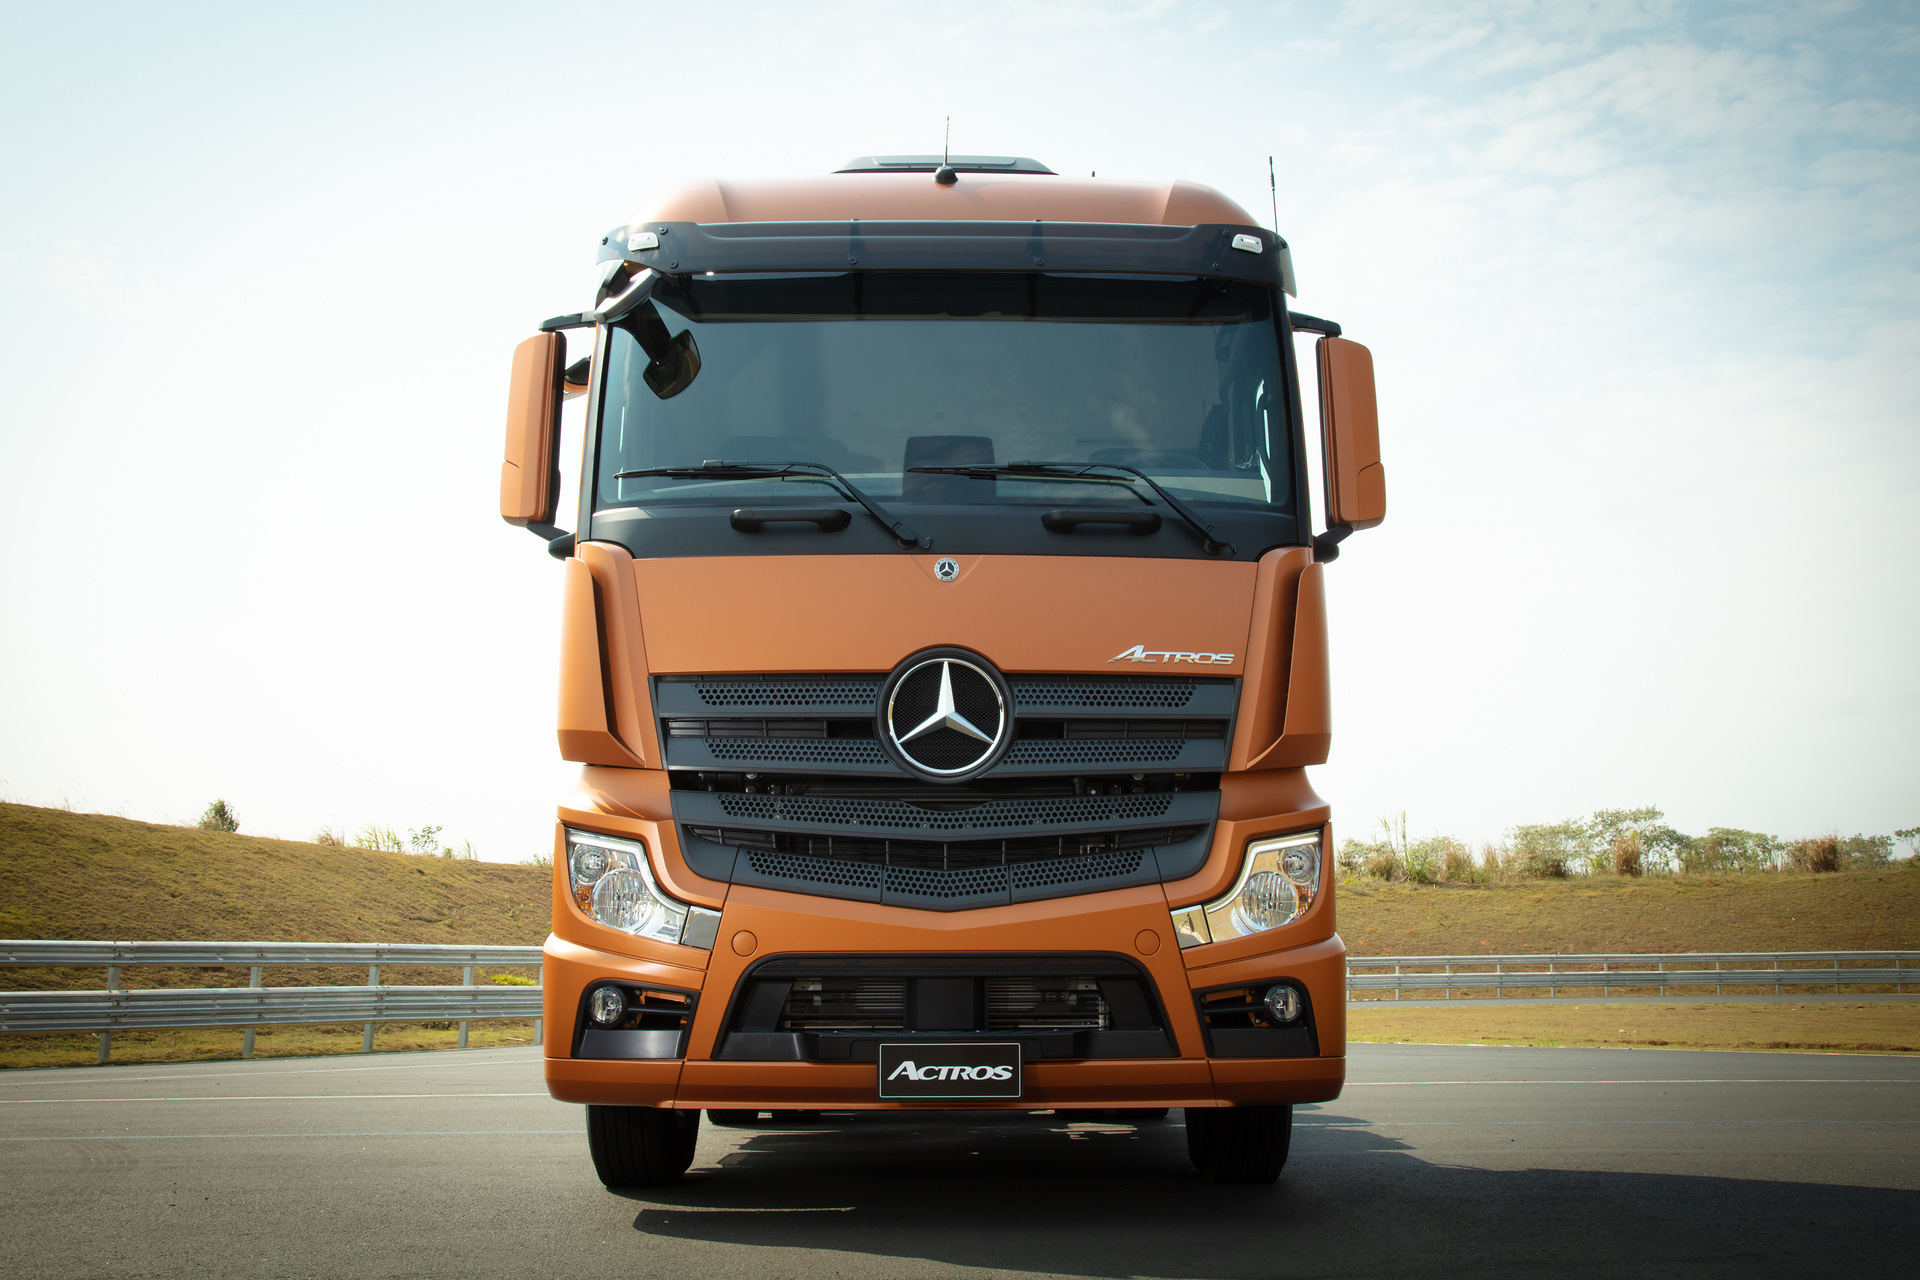 Major order in Brazil: 100 Mercedes-Benz Actros for transport company Contatto